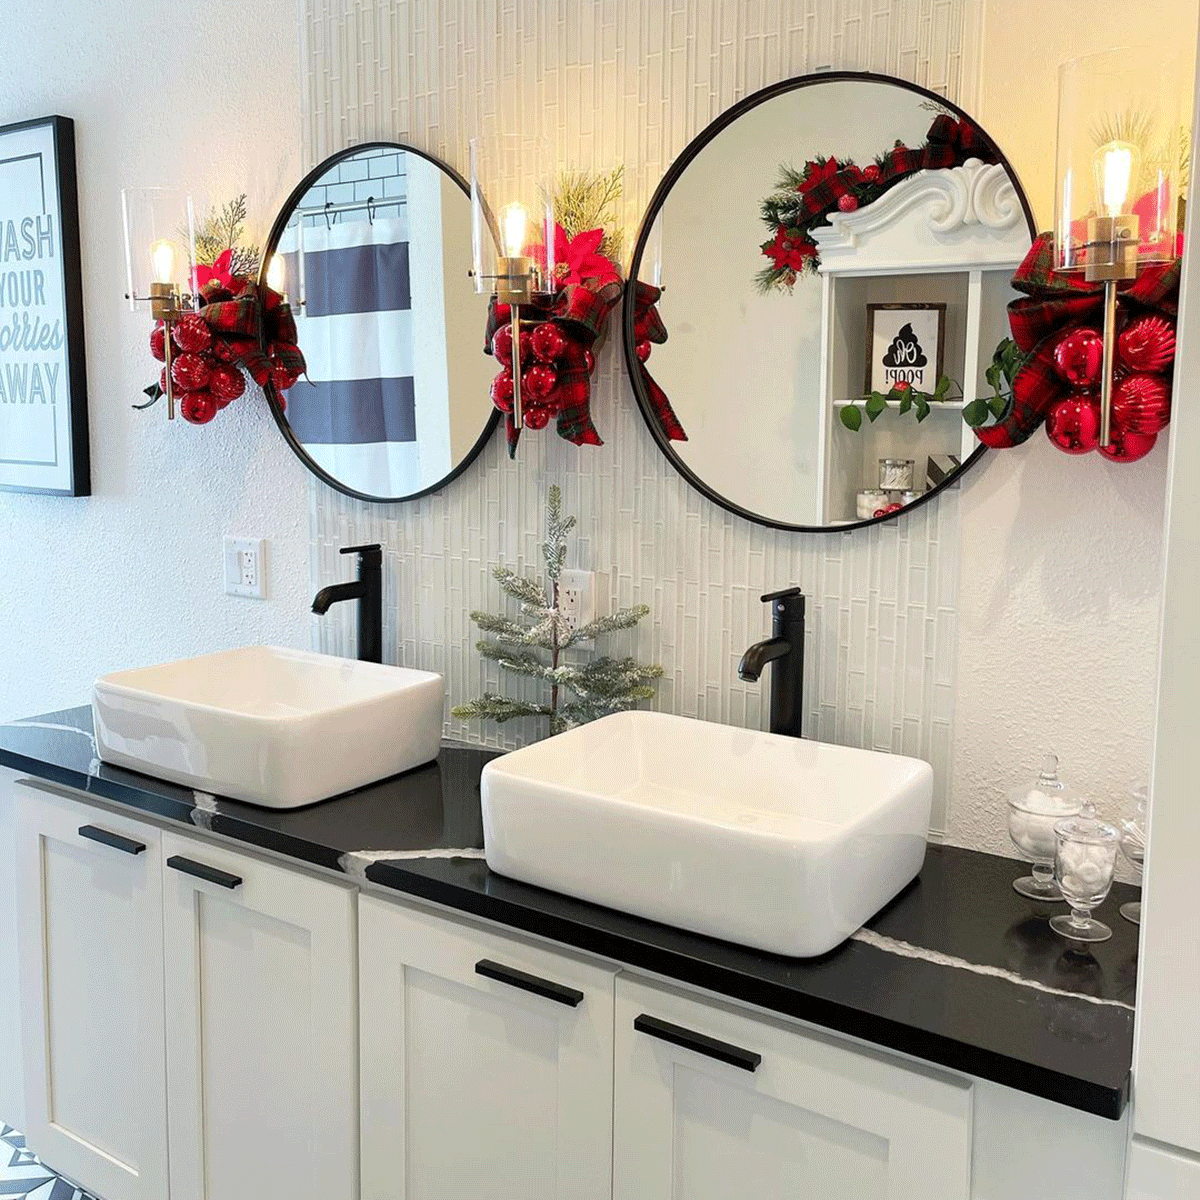 10 Bathrooms Decorated For Christmas To Give You Inspiration Adorn The Lighting Courtesy @nickser Upper Instagram